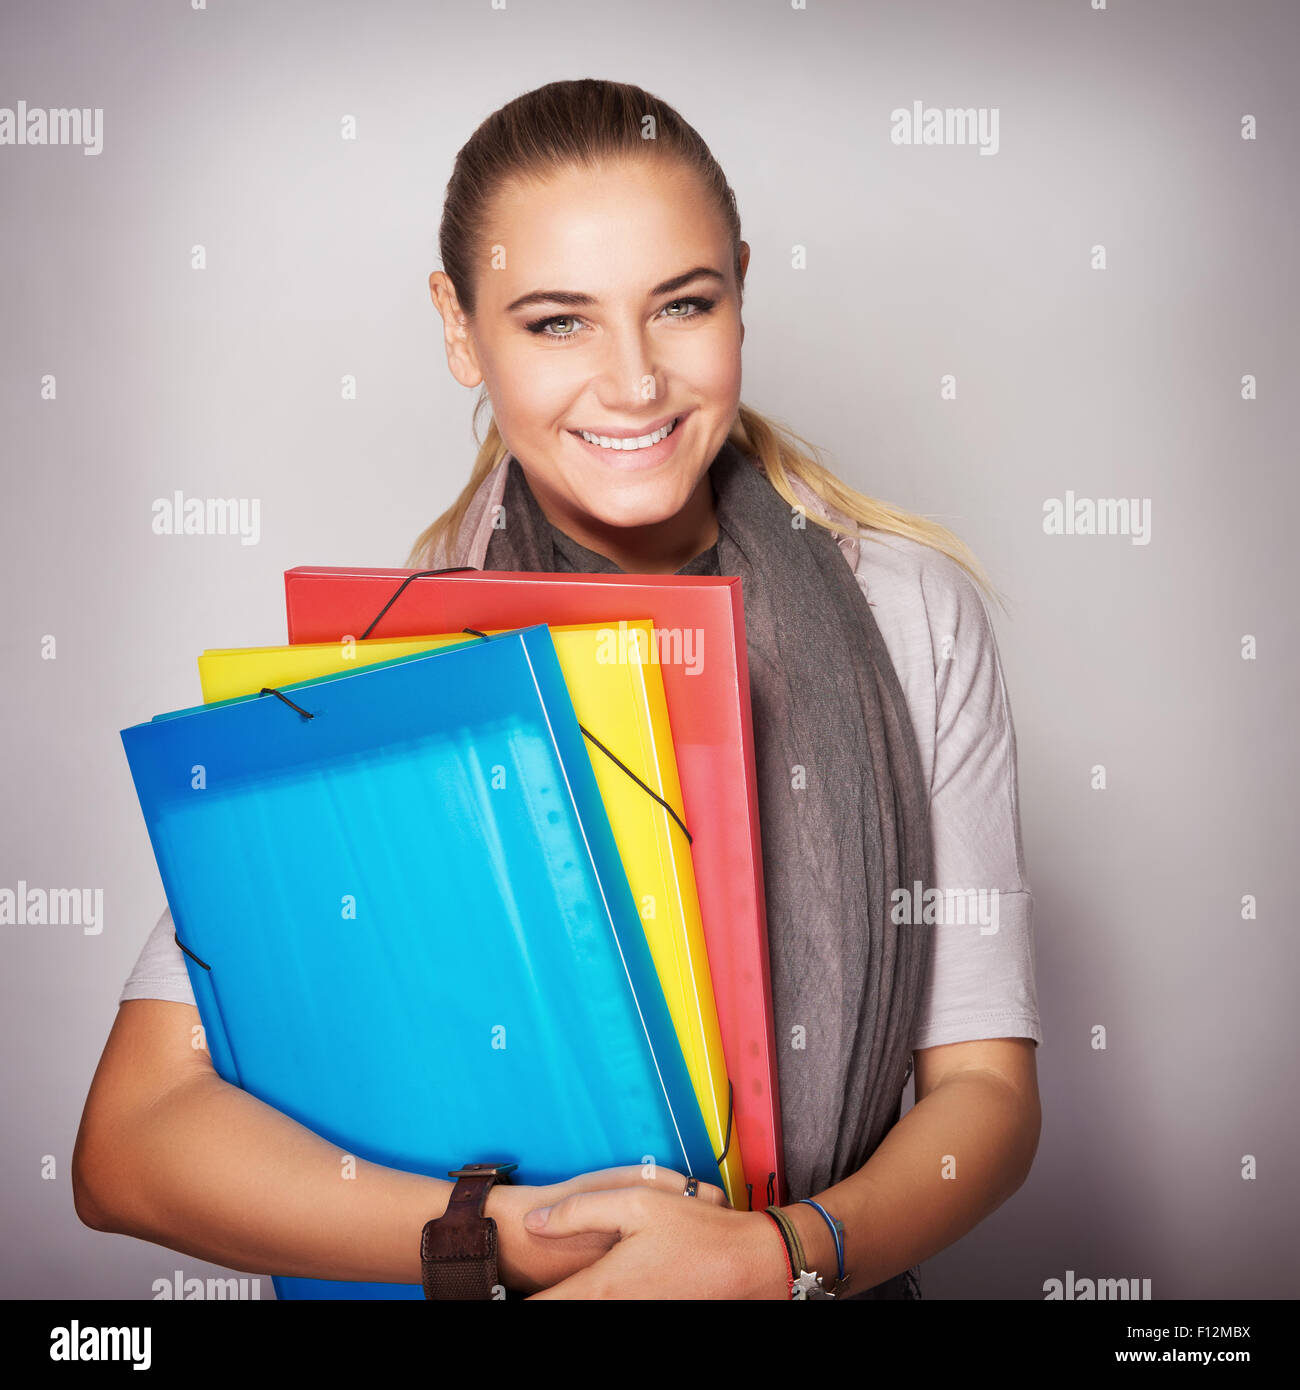 Portrait of beautiful happy student girl with colorful folders in hands over gray background, enjoying start of education Stock Photo